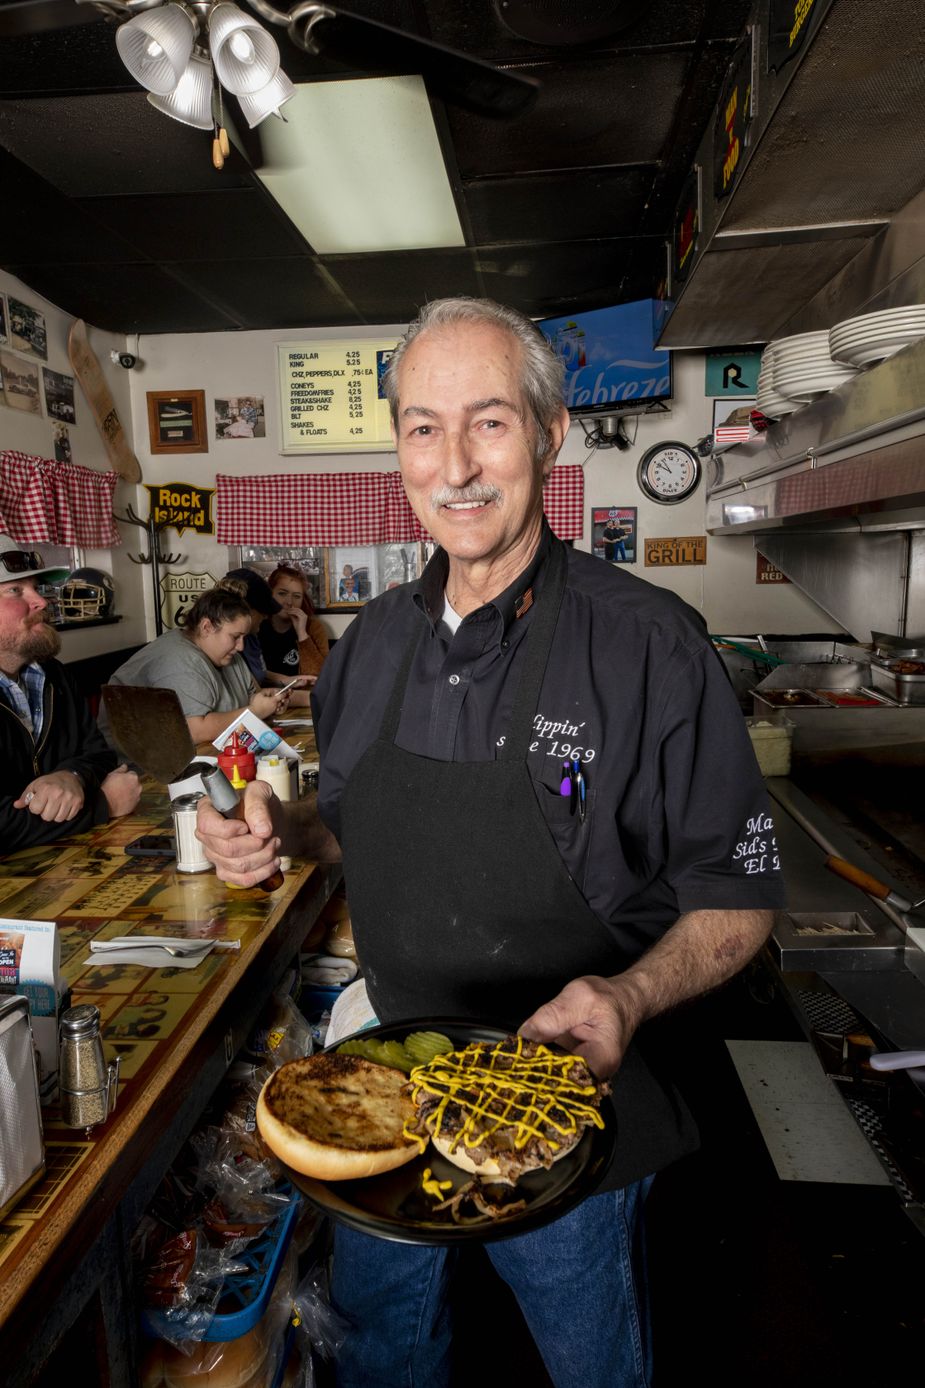 Marty Hall opened Sid’s Diner in 1989 and named it in honor of his late father—the eponymous Sid—with whom he had planned to run the business before his death. Photo by Lori Duckworth